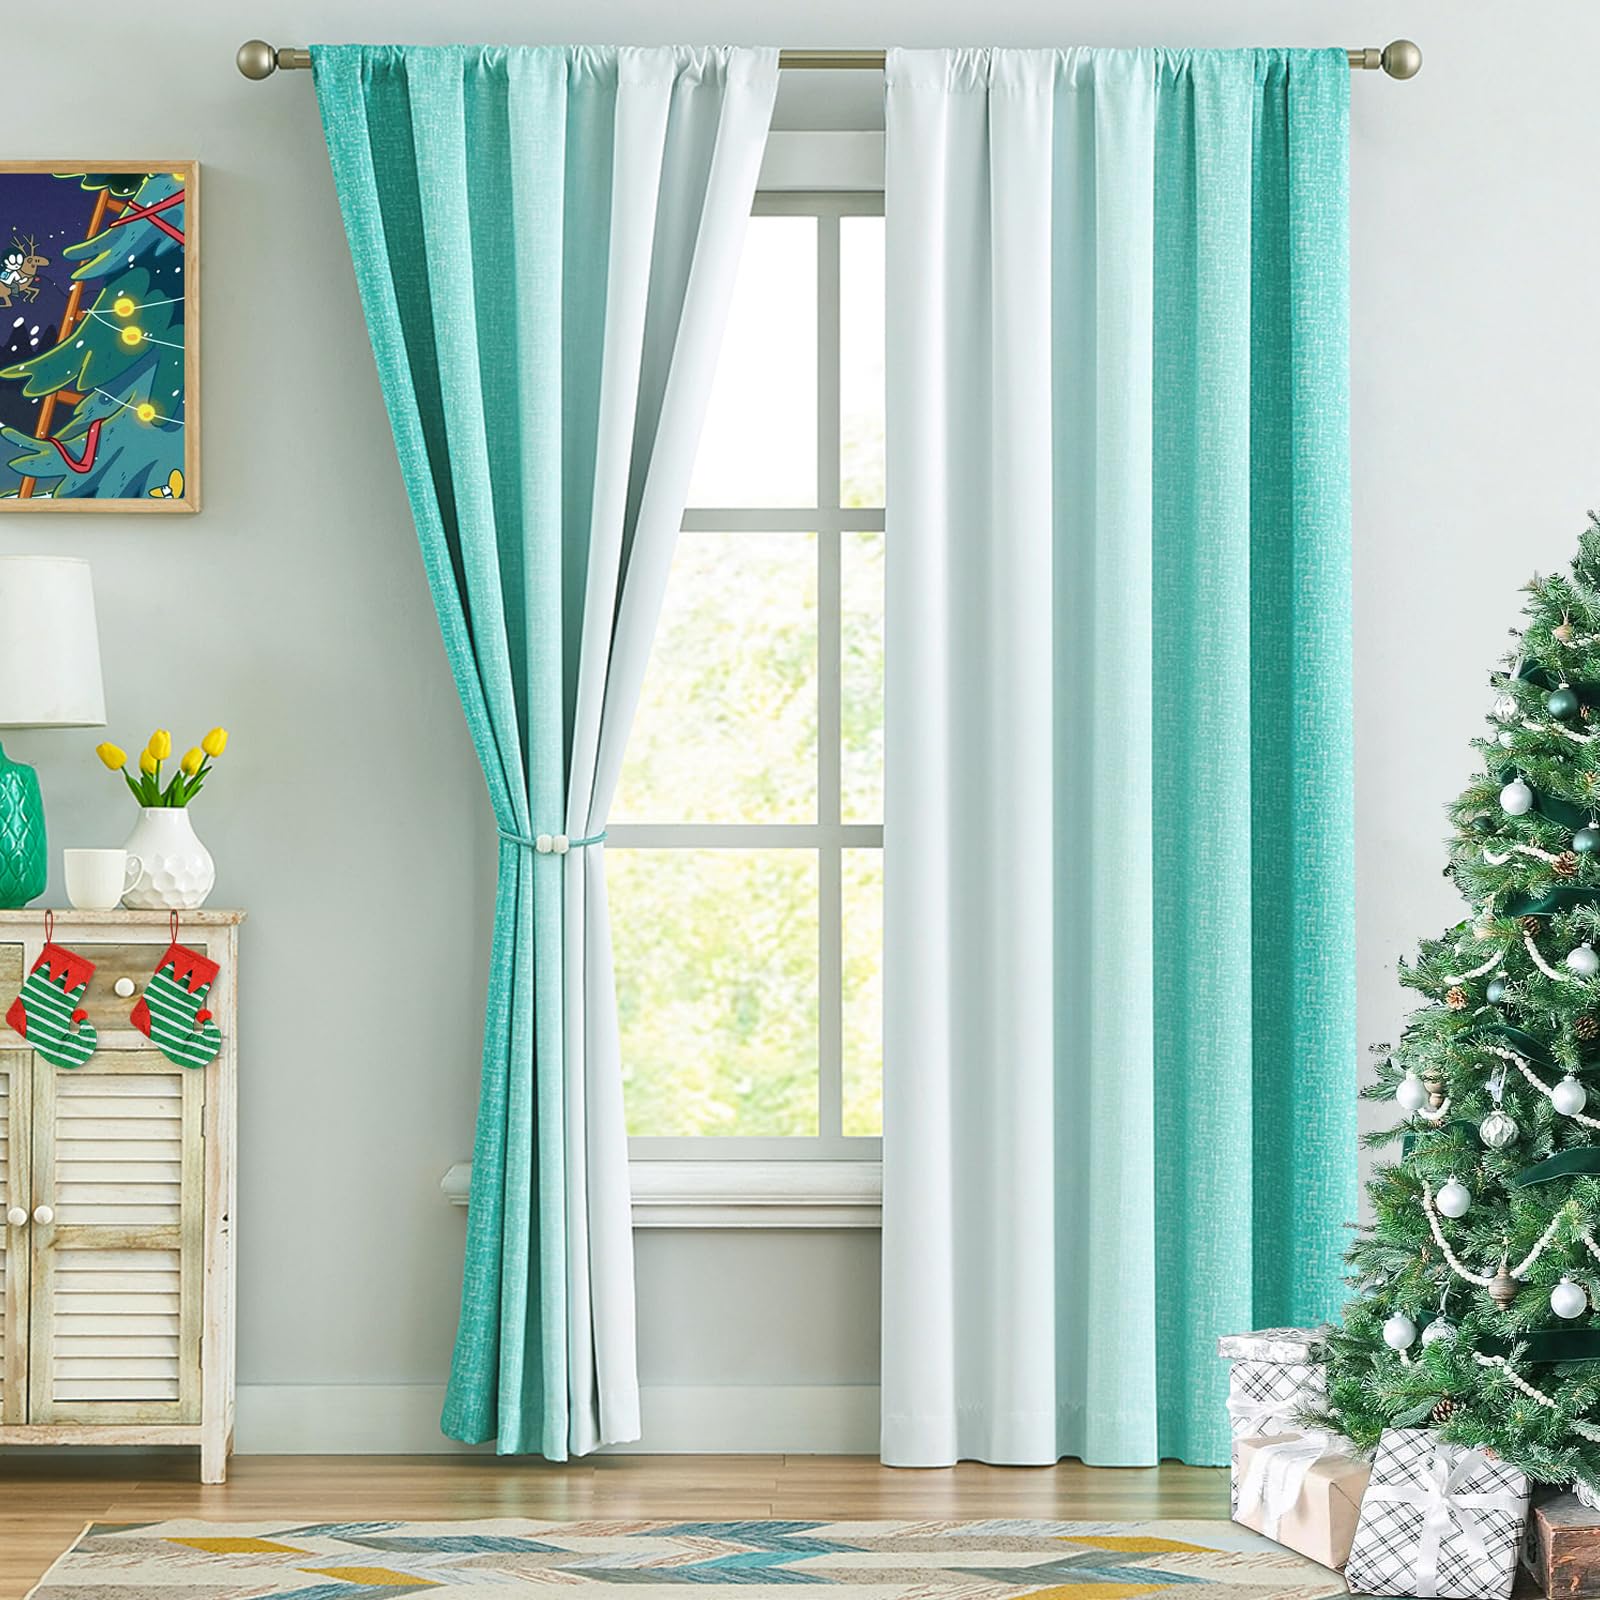 Geomoroccan Ombre Full Blackout Curtains 95 Inches Long, Teal and White Christmas Window Treatments for Bedroom Living Room, Lin